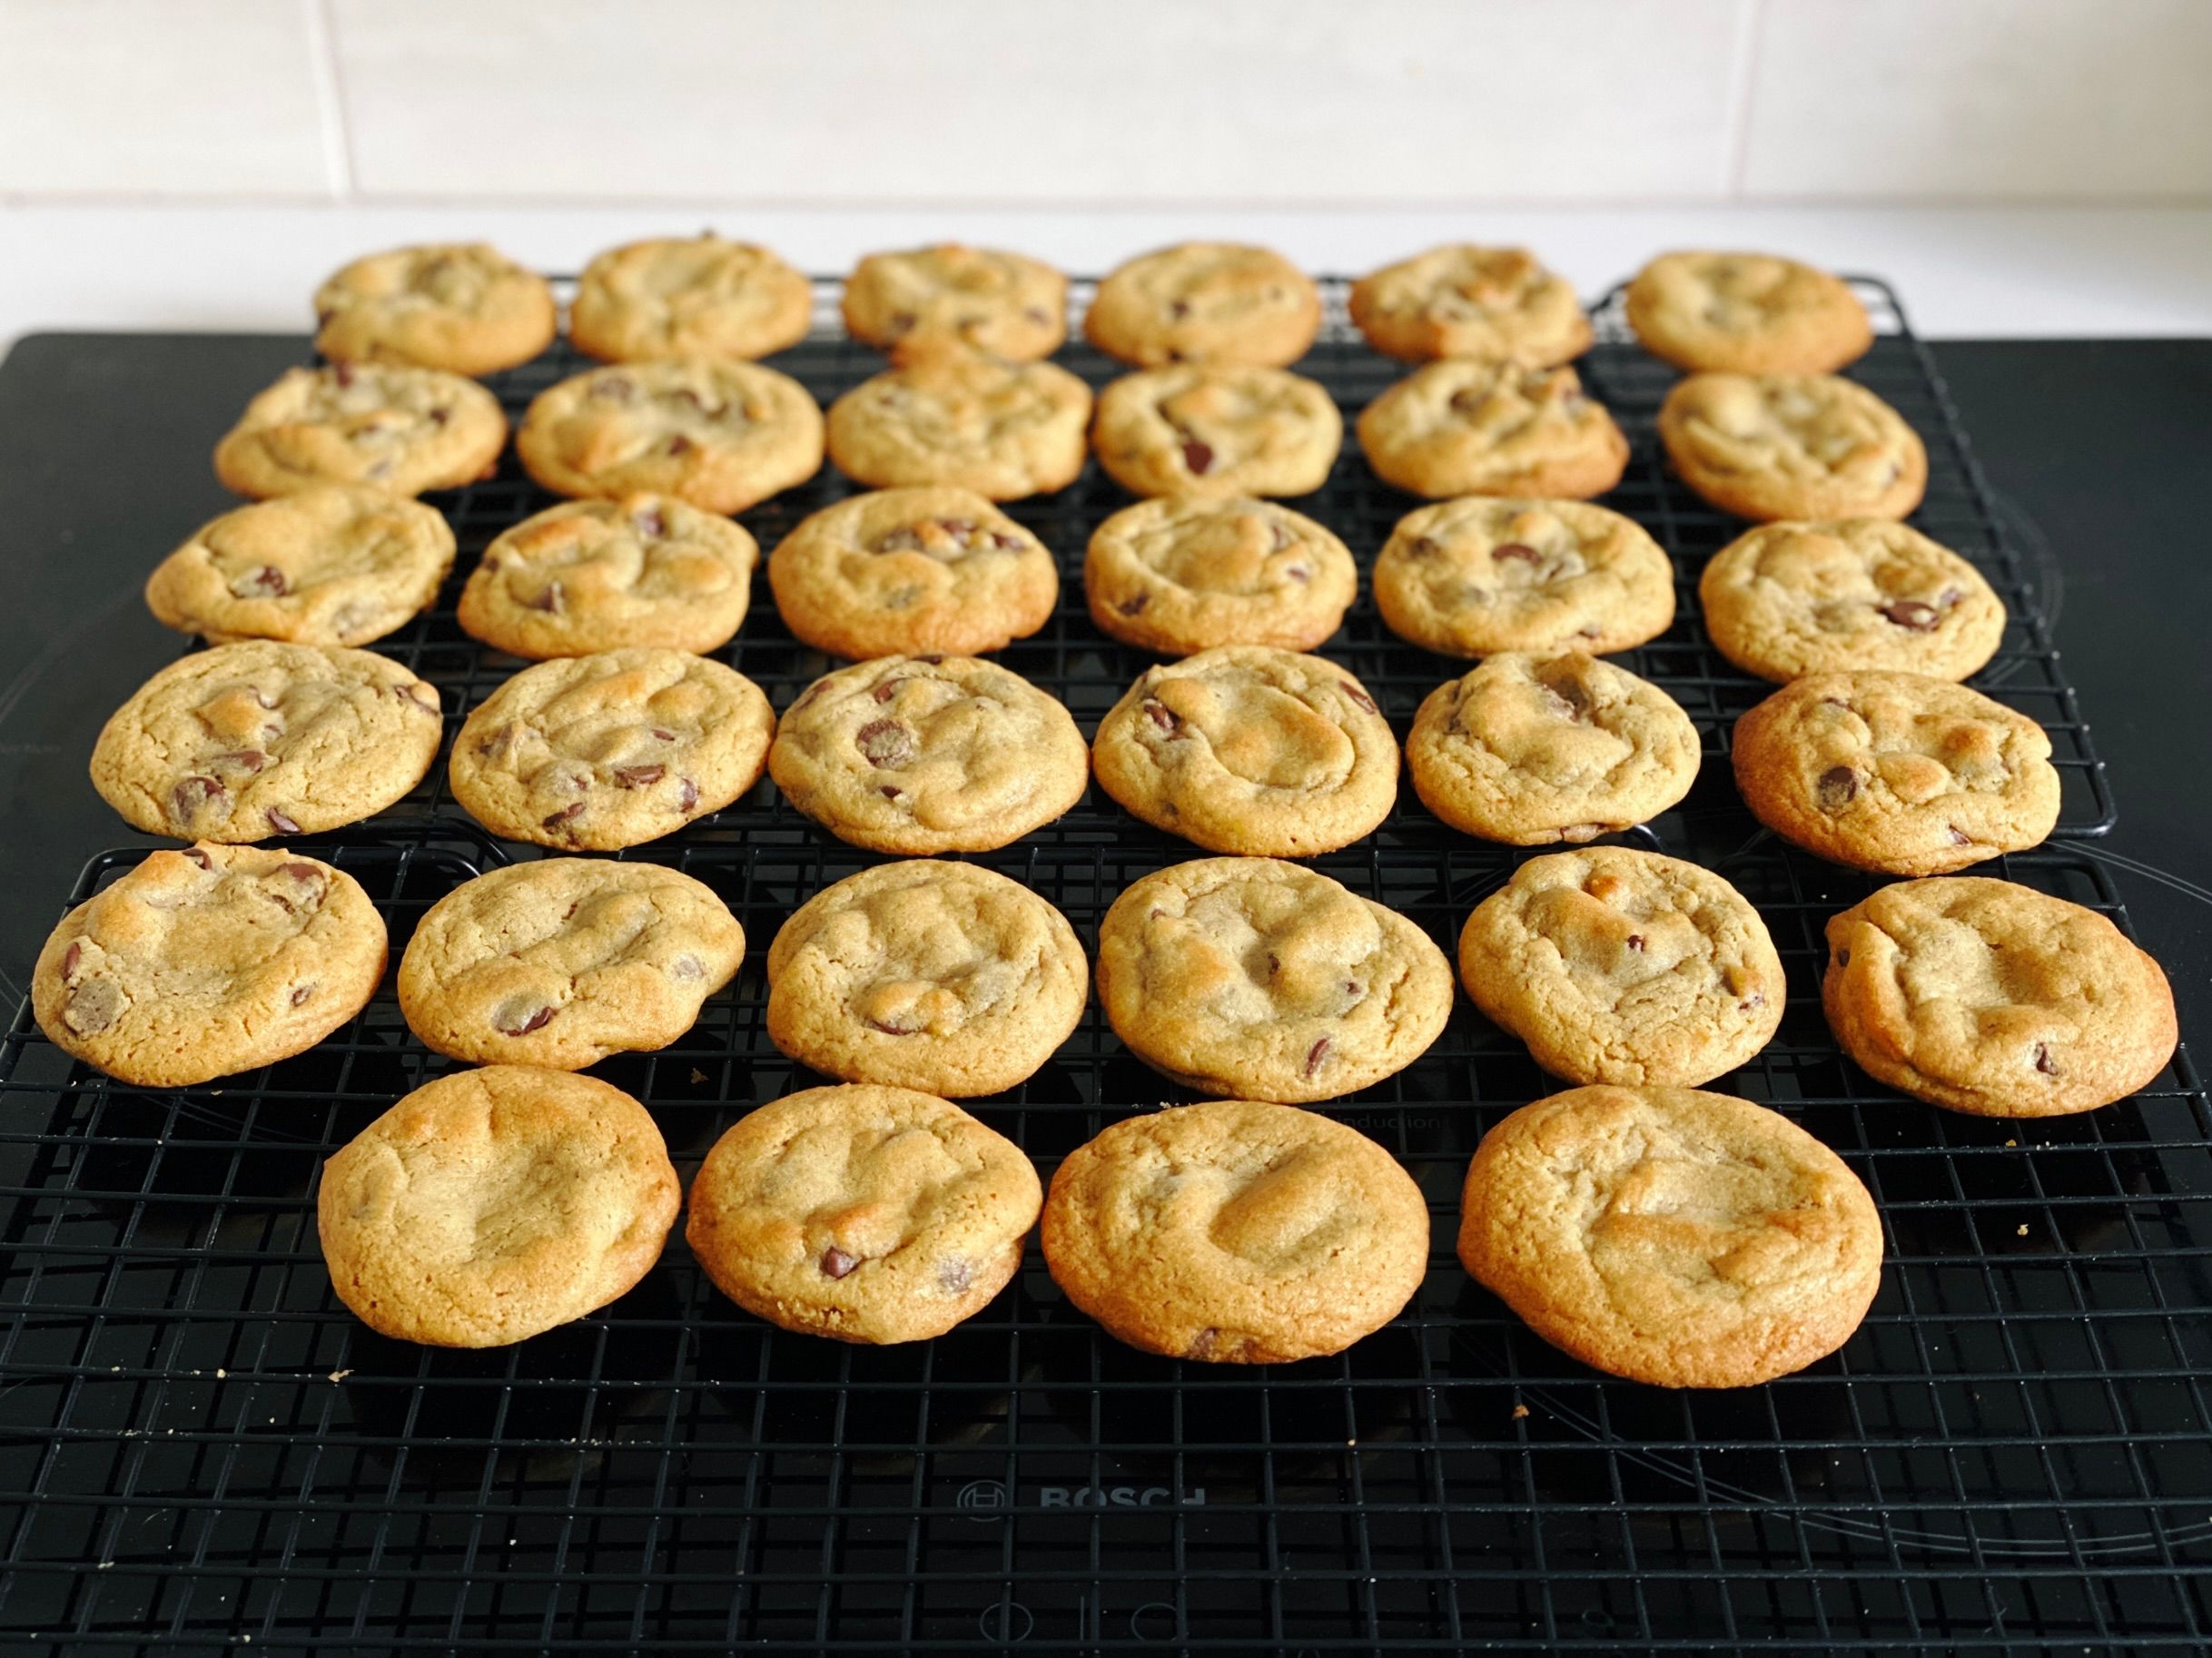 A photo of two cooling racks with small-ish round golden-brown cookies on top.